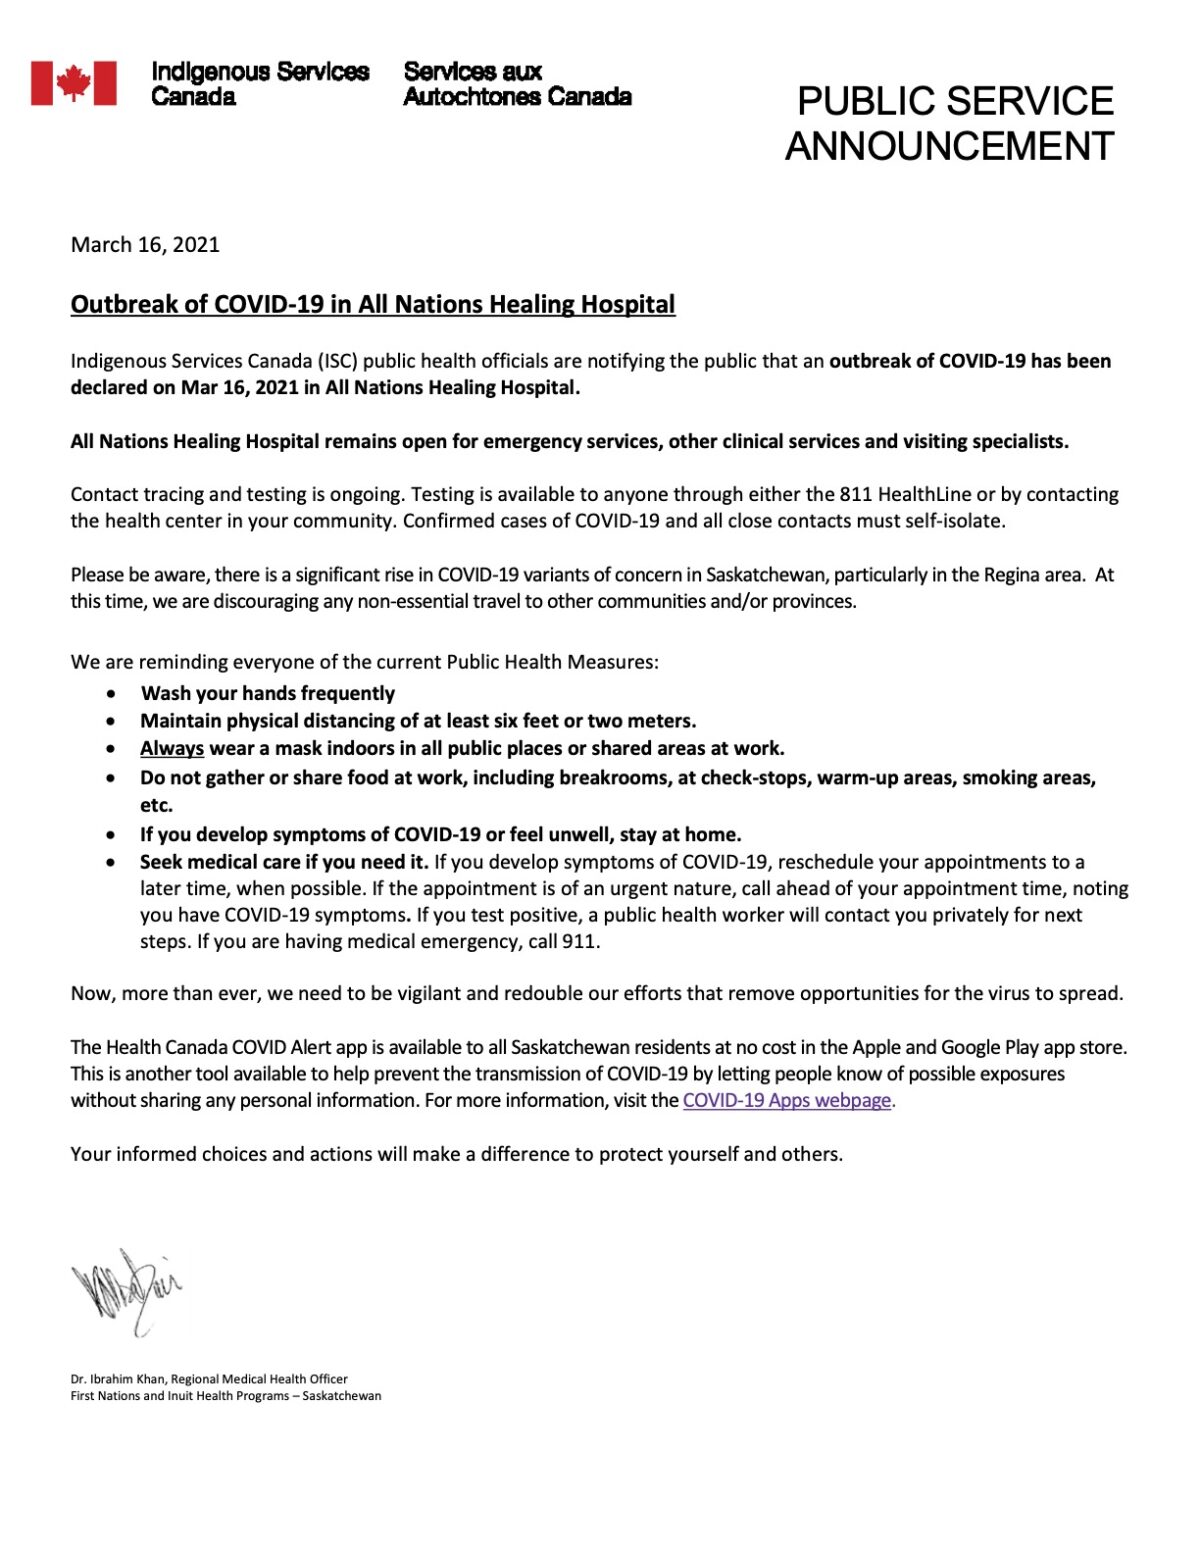 FINAL-PSA-COVID-19-ISC-ANHH-Outbreak-03-16-2021-1200x1553.jpg